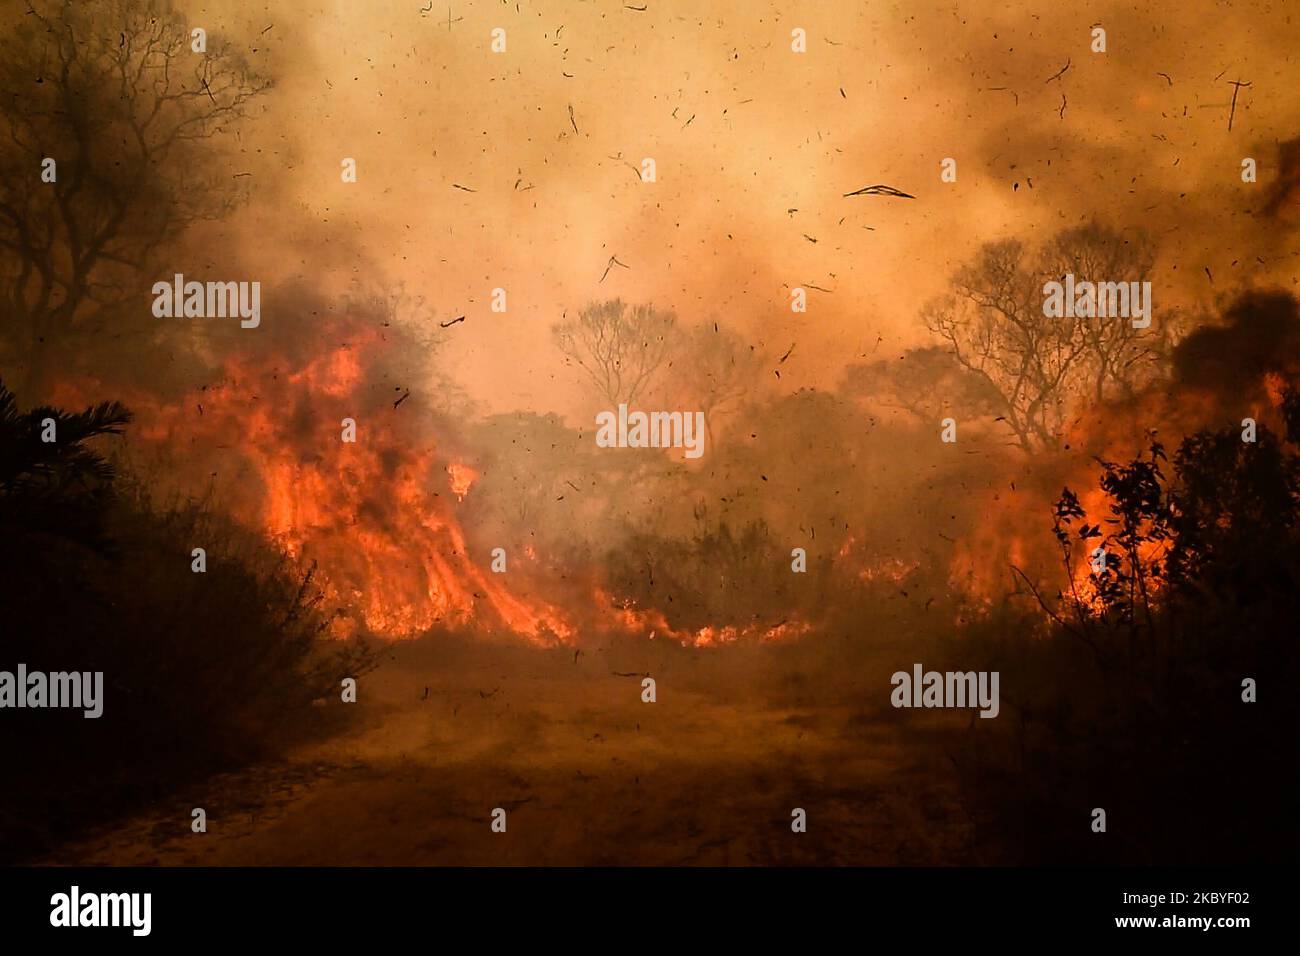 Out of control forest fire burns the area of the Brazilian Pantanal in rural Pocone, Mato Grosso, Brazil, on August 19, 2020 in the largest fire ever recorded in the rich biome The brazilian Pantanal - one of the largest tropical floodplains in the world - is suffering since the end of July with the worst wildfires in its registered history. More than 12%, or 16.500 sq. km (almost the size of Kuweit) has already been burned, and the situation may get better only in October, when it's expected to rain. (Photo by Gustavo Basso/NurPhoto) Stock Photo